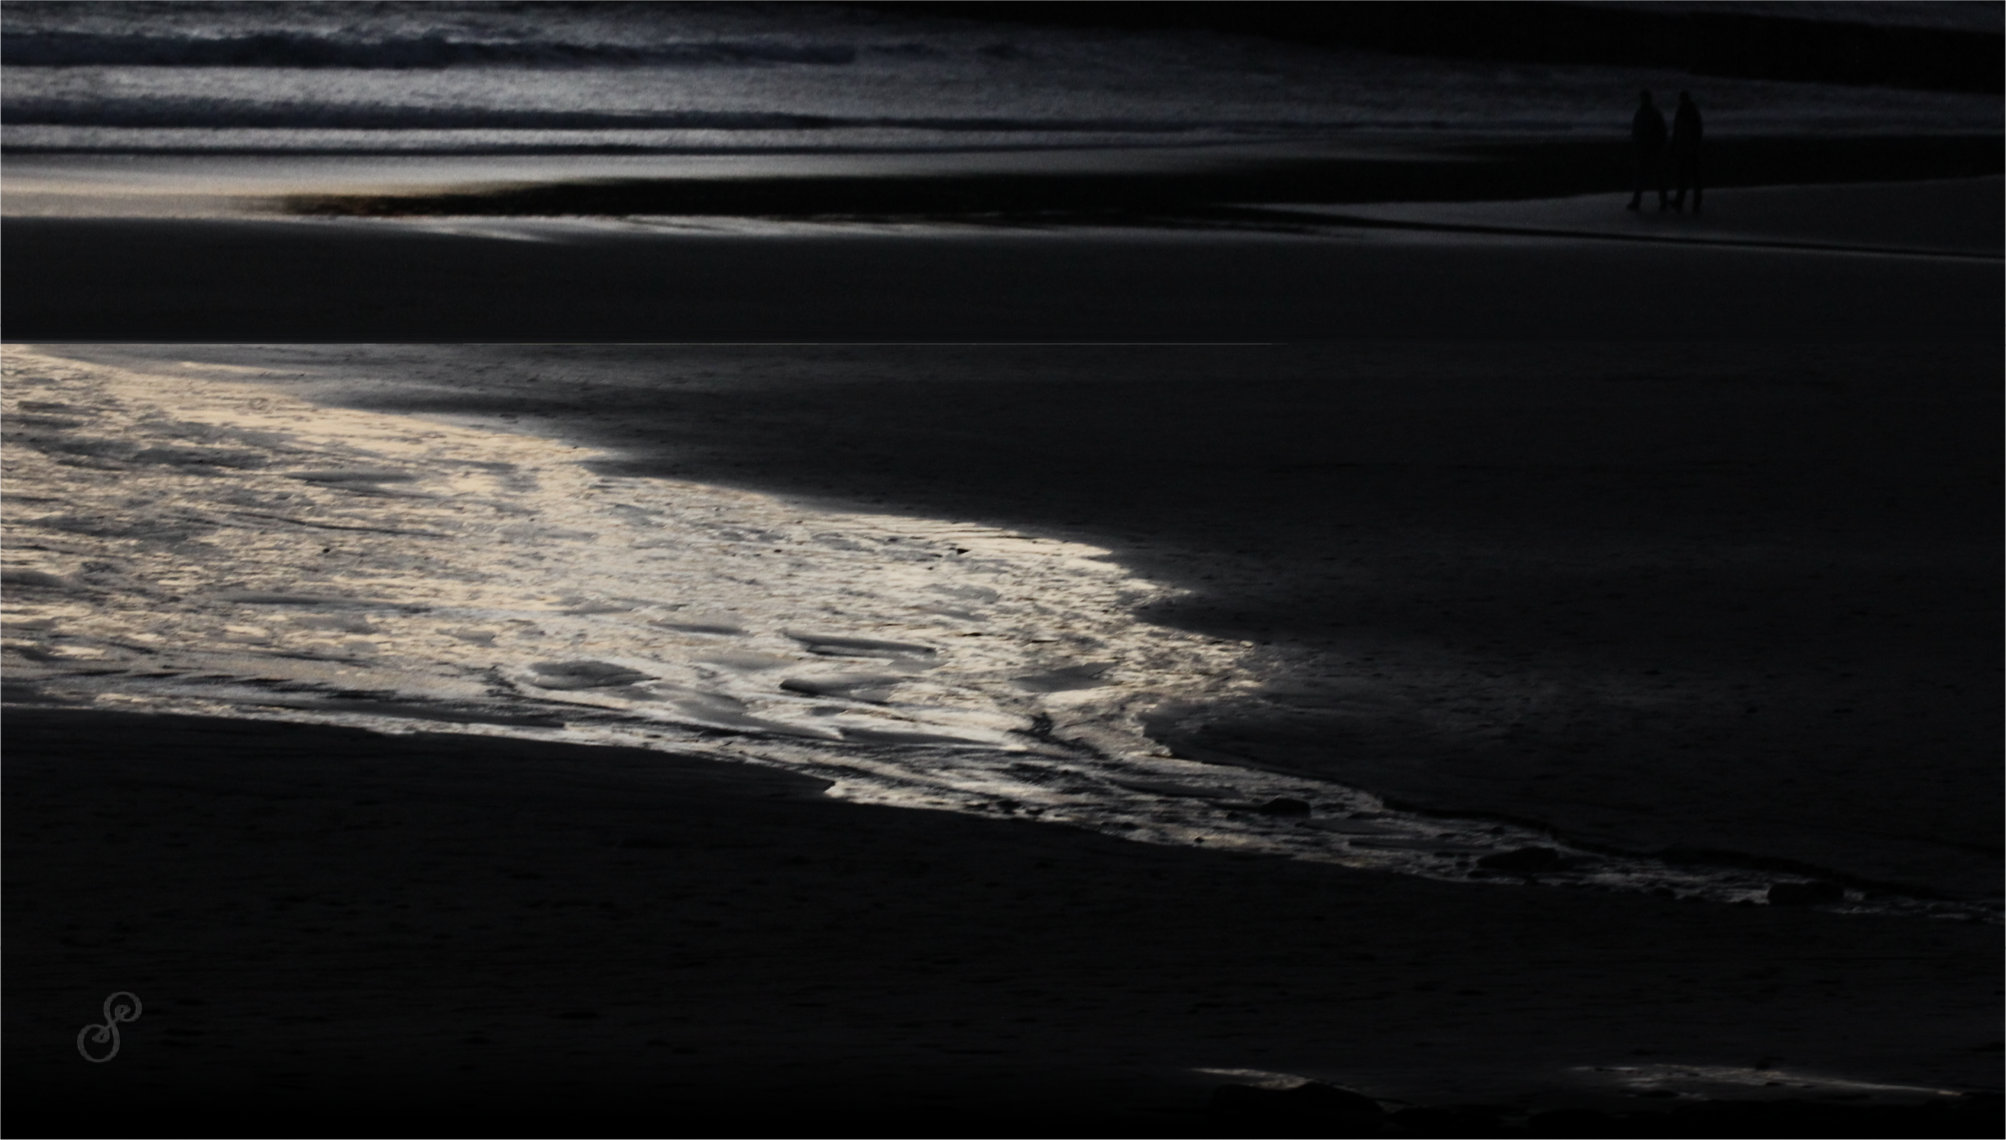 Silver sands, silver beach, moonlight, nearly black and white